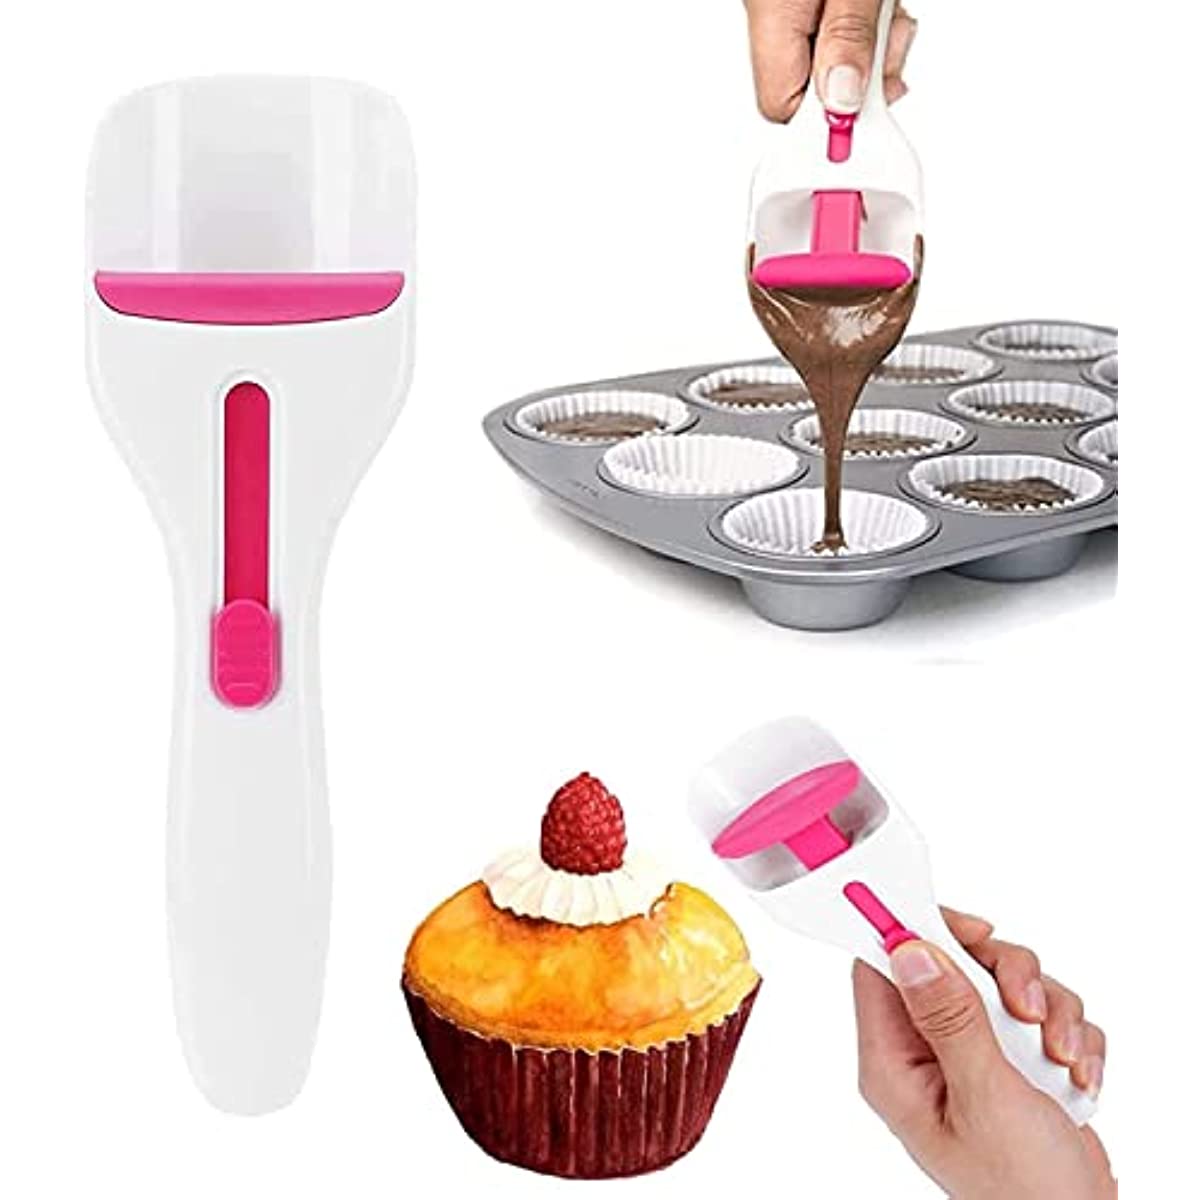 Pancake Batter Dispenser, Pancake Dispenser with Measuring Label, Plastic  Batter Dispenser with Cleaning Brush for Cupcakes, Waffles, Muffin Mix, or